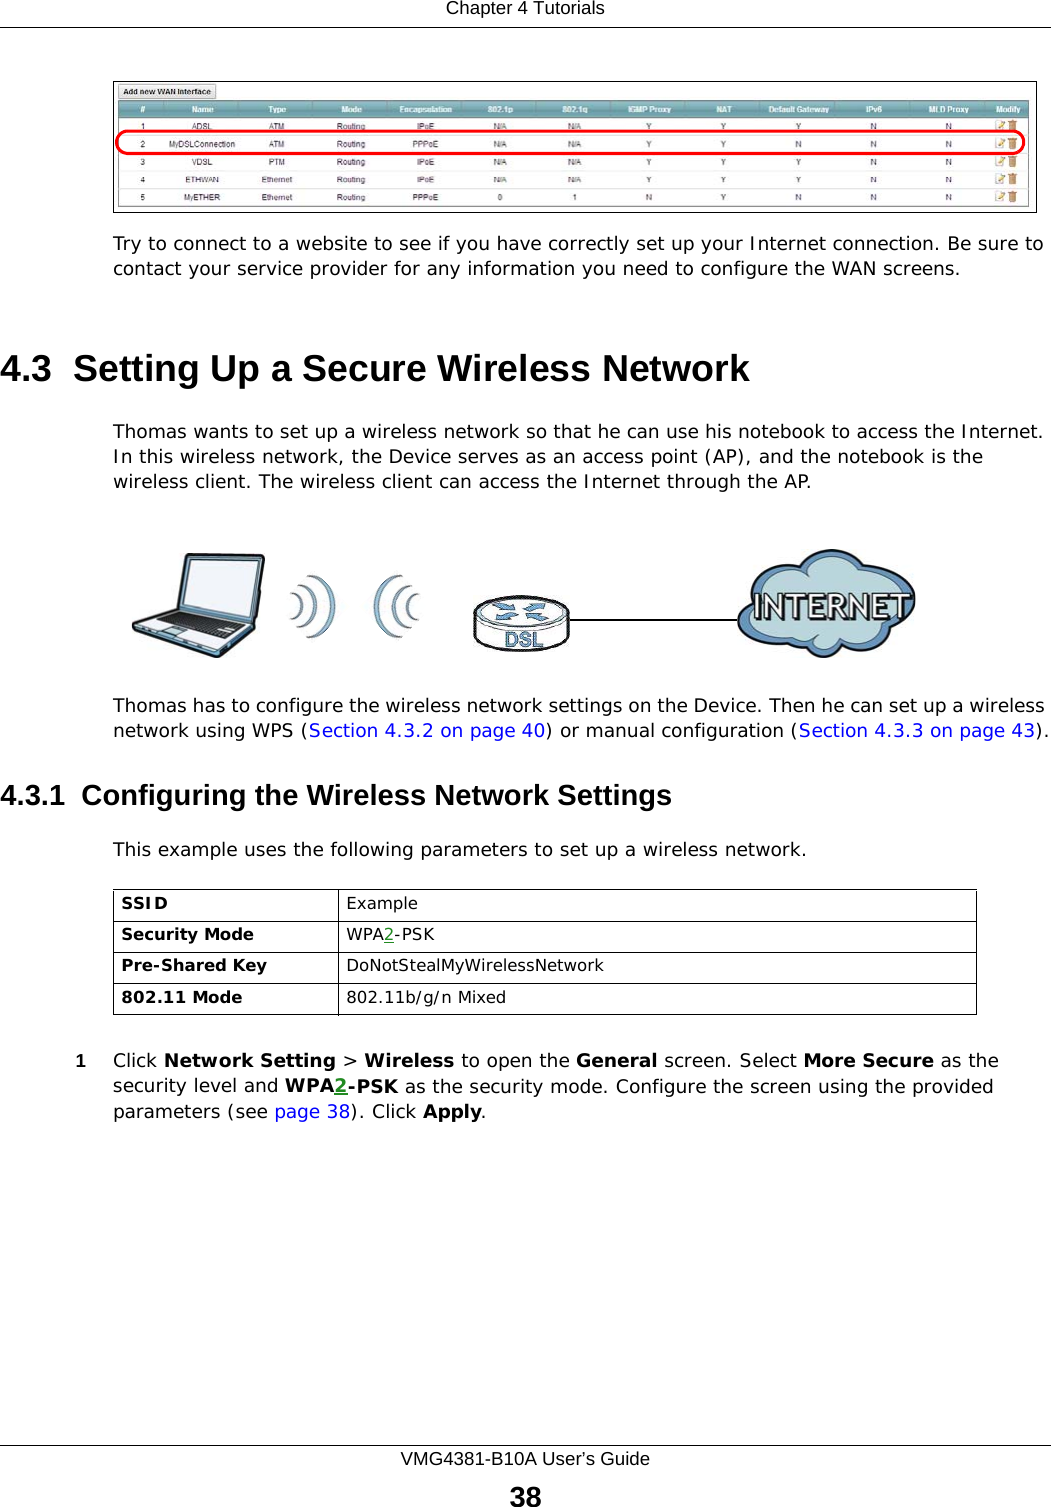 Chapter 4 TutorialsVMG4381-B10A User’s Guide38Try to connect to a website to see if you have correctly set up your Internet connection. Be sure to contact your service provider for any information you need to configure the WAN screens.4.3  Setting Up a Secure Wireless NetworkThomas wants to set up a wireless network so that he can use his notebook to access the Internet. In this wireless network, the Device serves as an access point (AP), and the notebook is the wireless client. The wireless client can access the Internet through the AP.Thomas has to configure the wireless network settings on the Device. Then he can set up a wireless network using WPS (Section 4.3.2 on page 40) or manual configuration (Section 4.3.3 on page 43).4.3.1  Configuring the Wireless Network SettingsThis example uses the following parameters to set up a wireless network.1Click Network Setting &gt; Wireless to open the General screen. Select More Secure as the security level and WPA2-PSK as the security mode. Configure the screen using the provided parameters (see page 38). Click Apply.SSID ExampleSecurity Mode WPA2-PSKPre-Shared Key DoNotStealMyWirelessNetwork802.11 Mode 802.11b/g/n Mixed